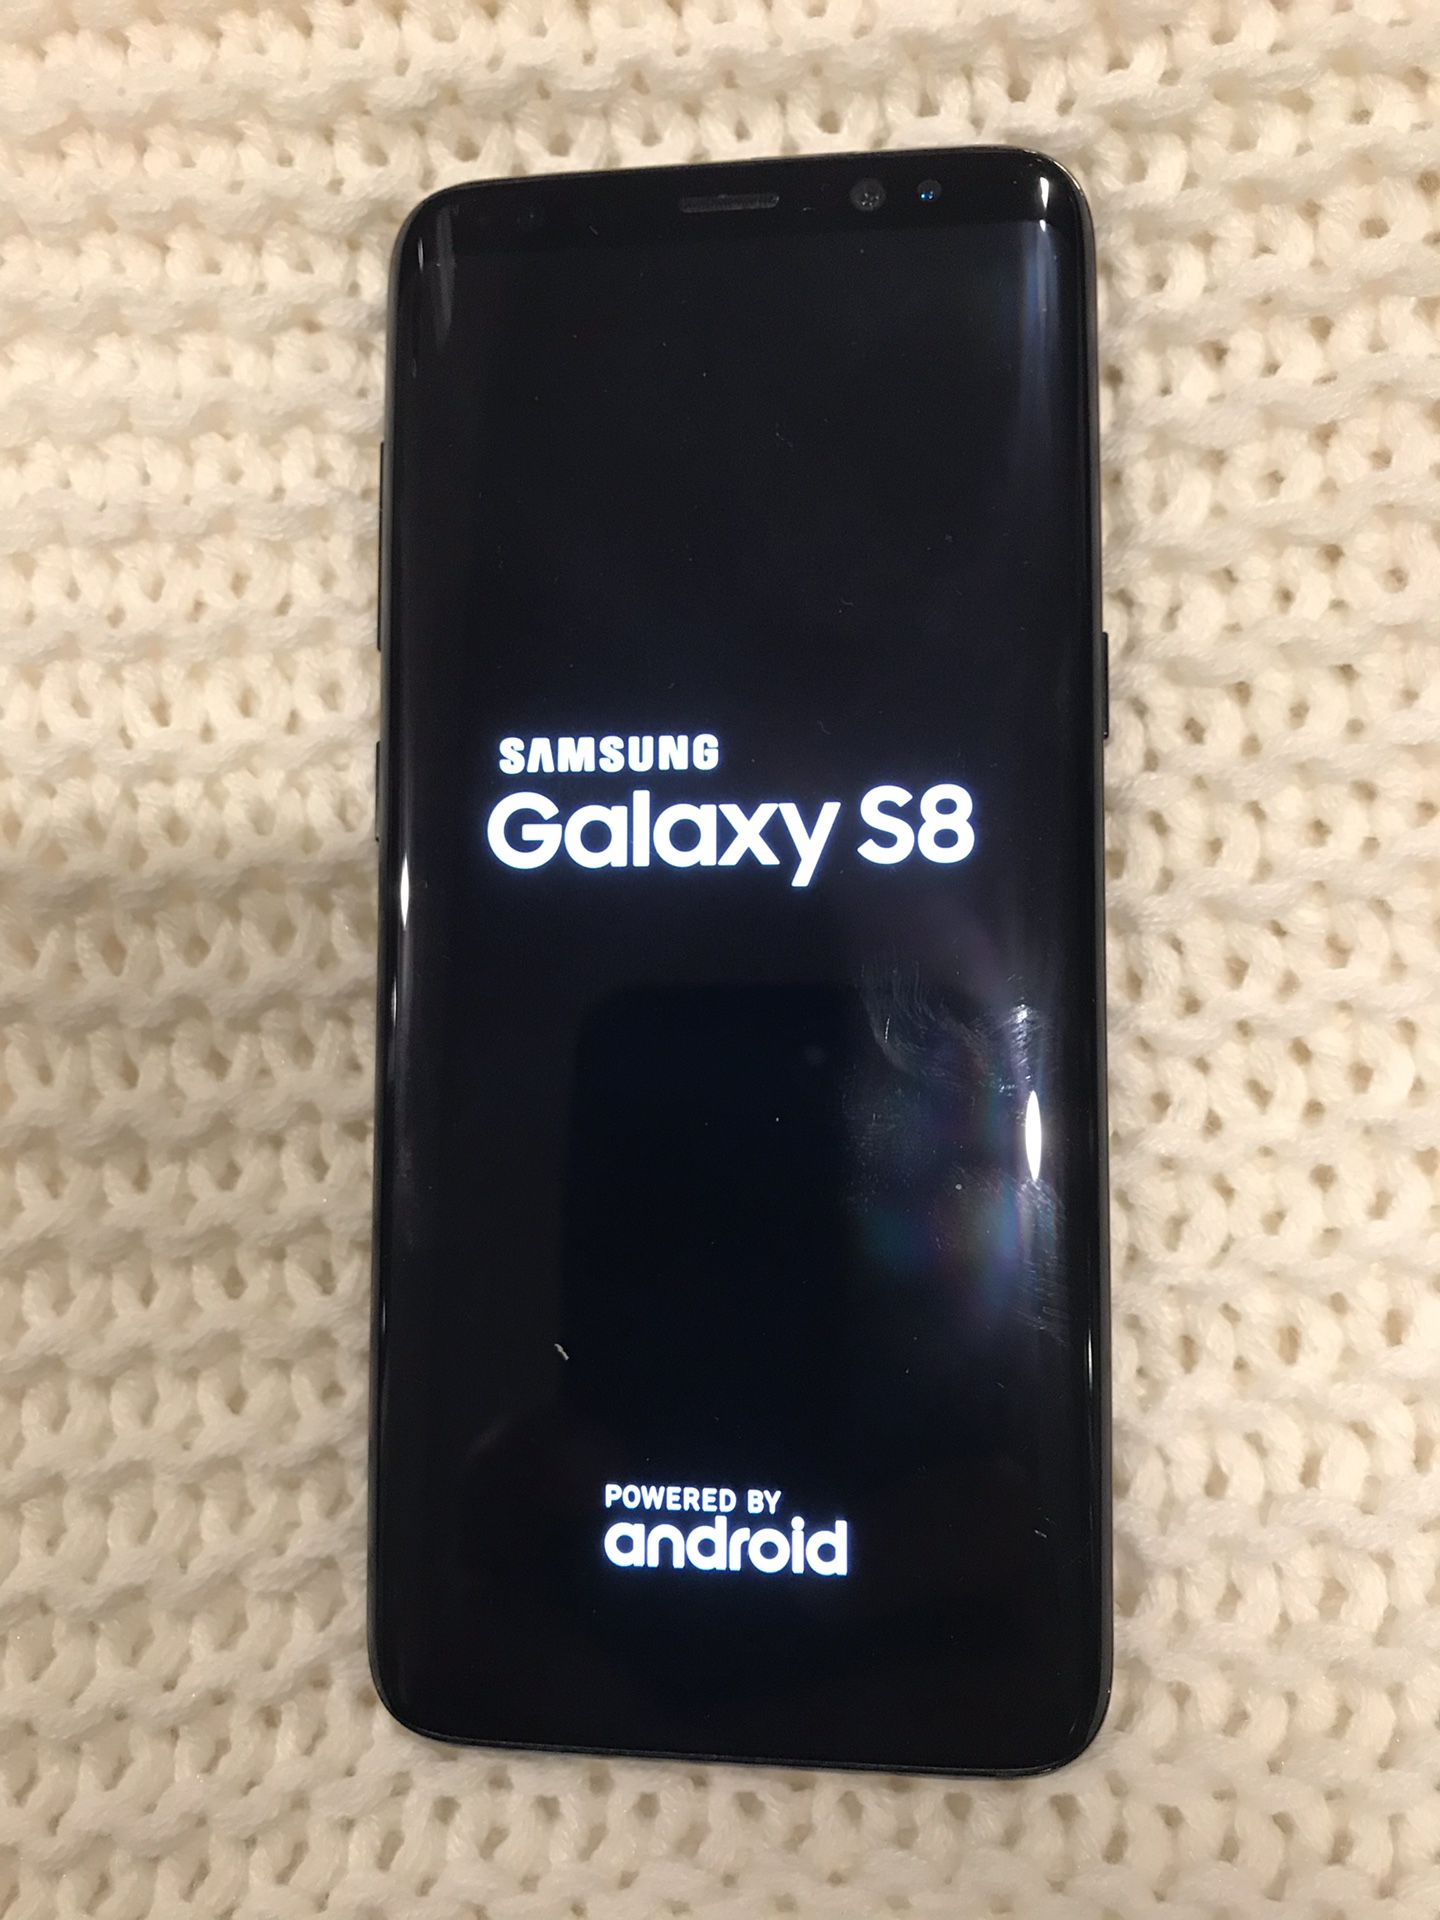 GOOD CONDITION Samsung Galaxy S8 64GB (T-Mobile) UNLOCKED +USB CABLE +CHARGER $230 FIRM